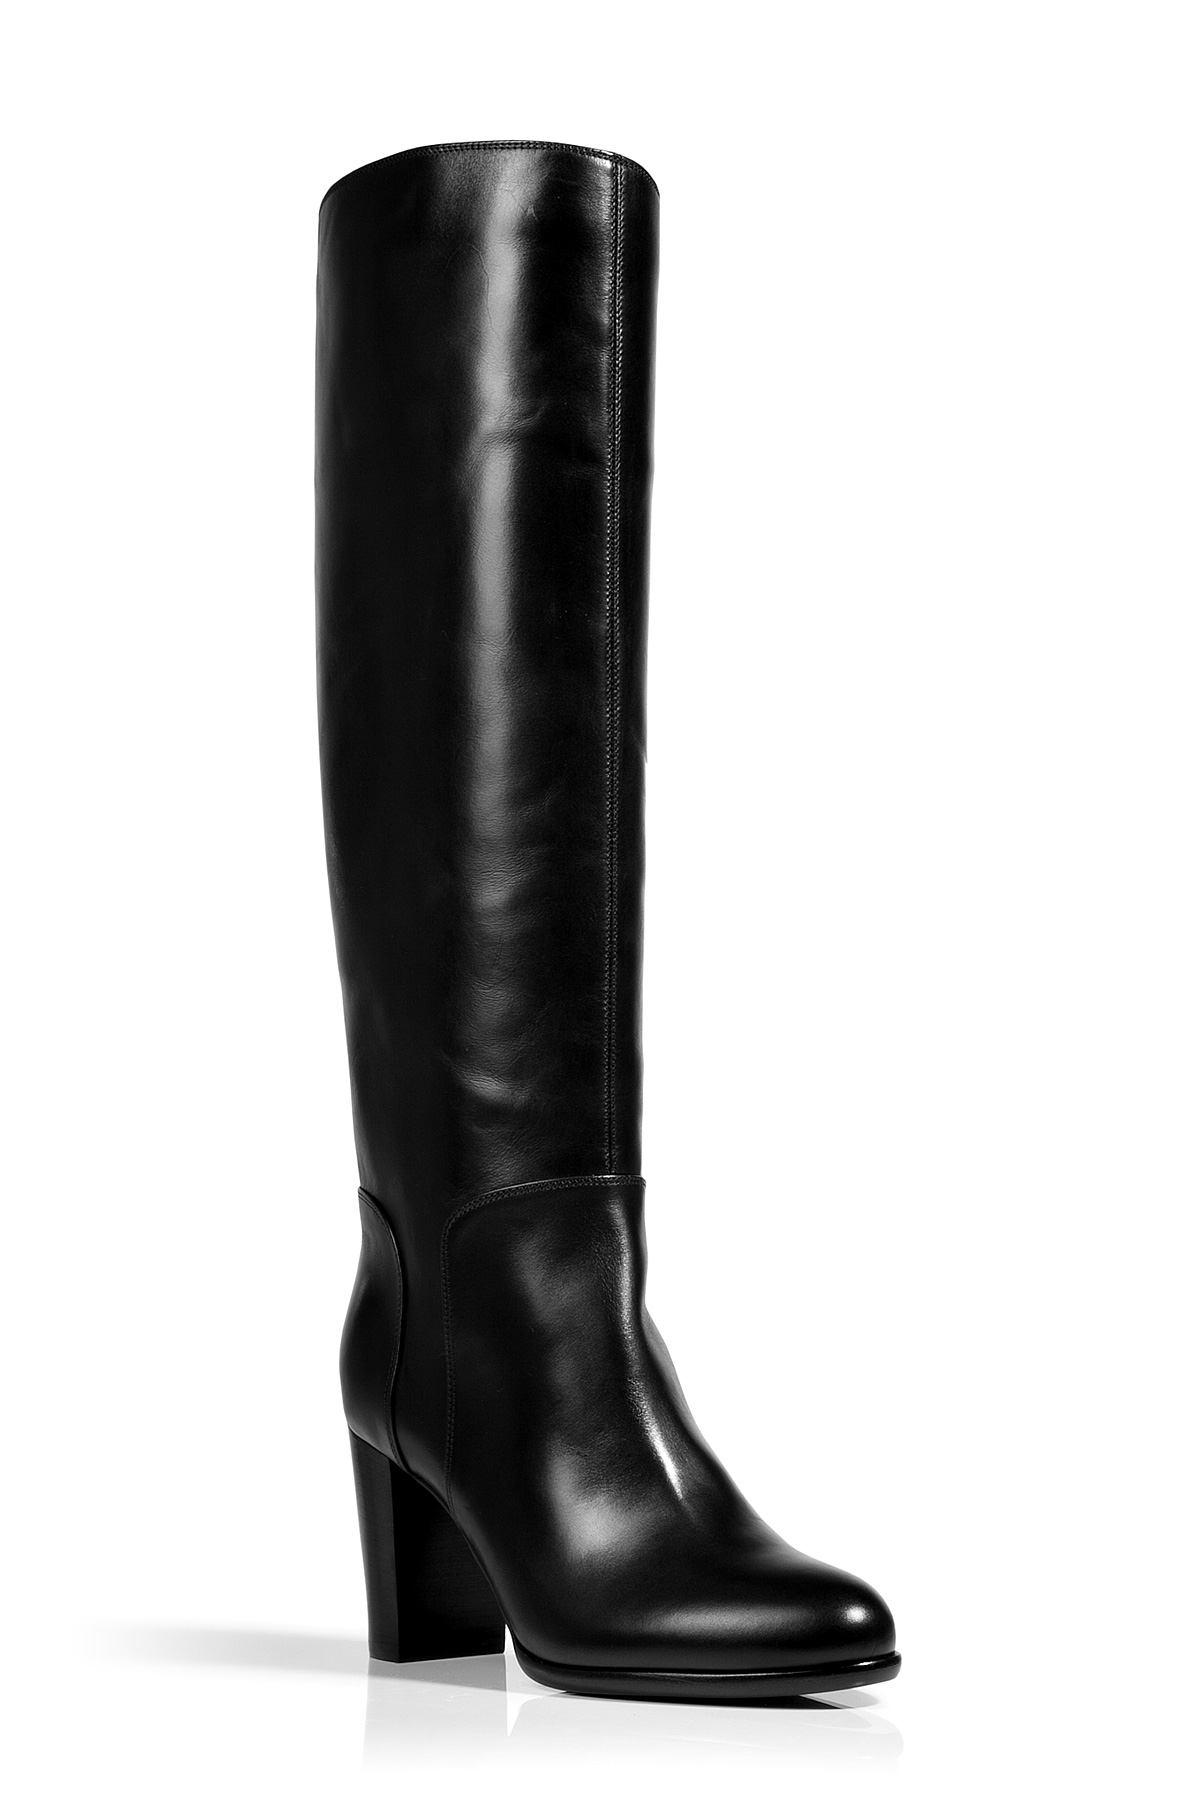 Sergio rossi Leather Tall Boots in Black in Black | Lyst